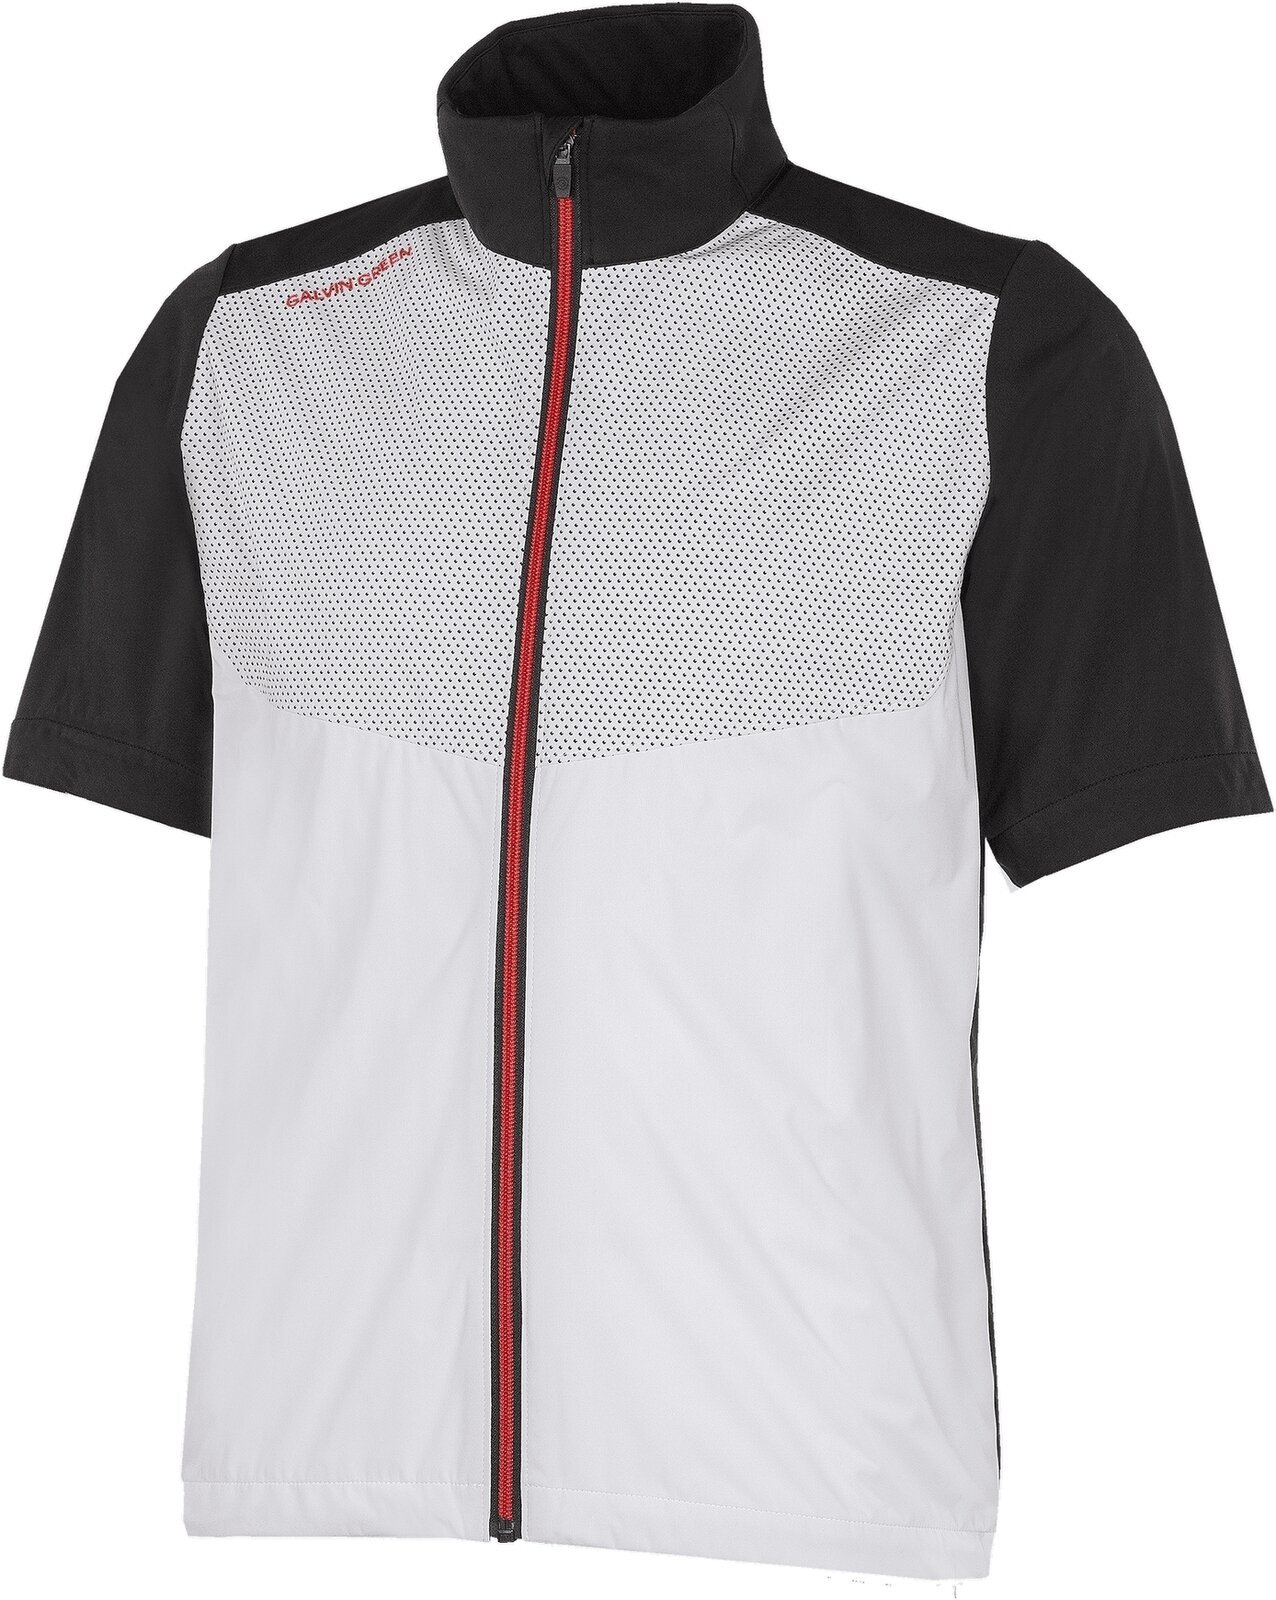 Chaqueta Galvin Green Livingston Mens Windproof And Water Repellent Short Sleeve Jacket White/Black/Red 2XL Chaqueta